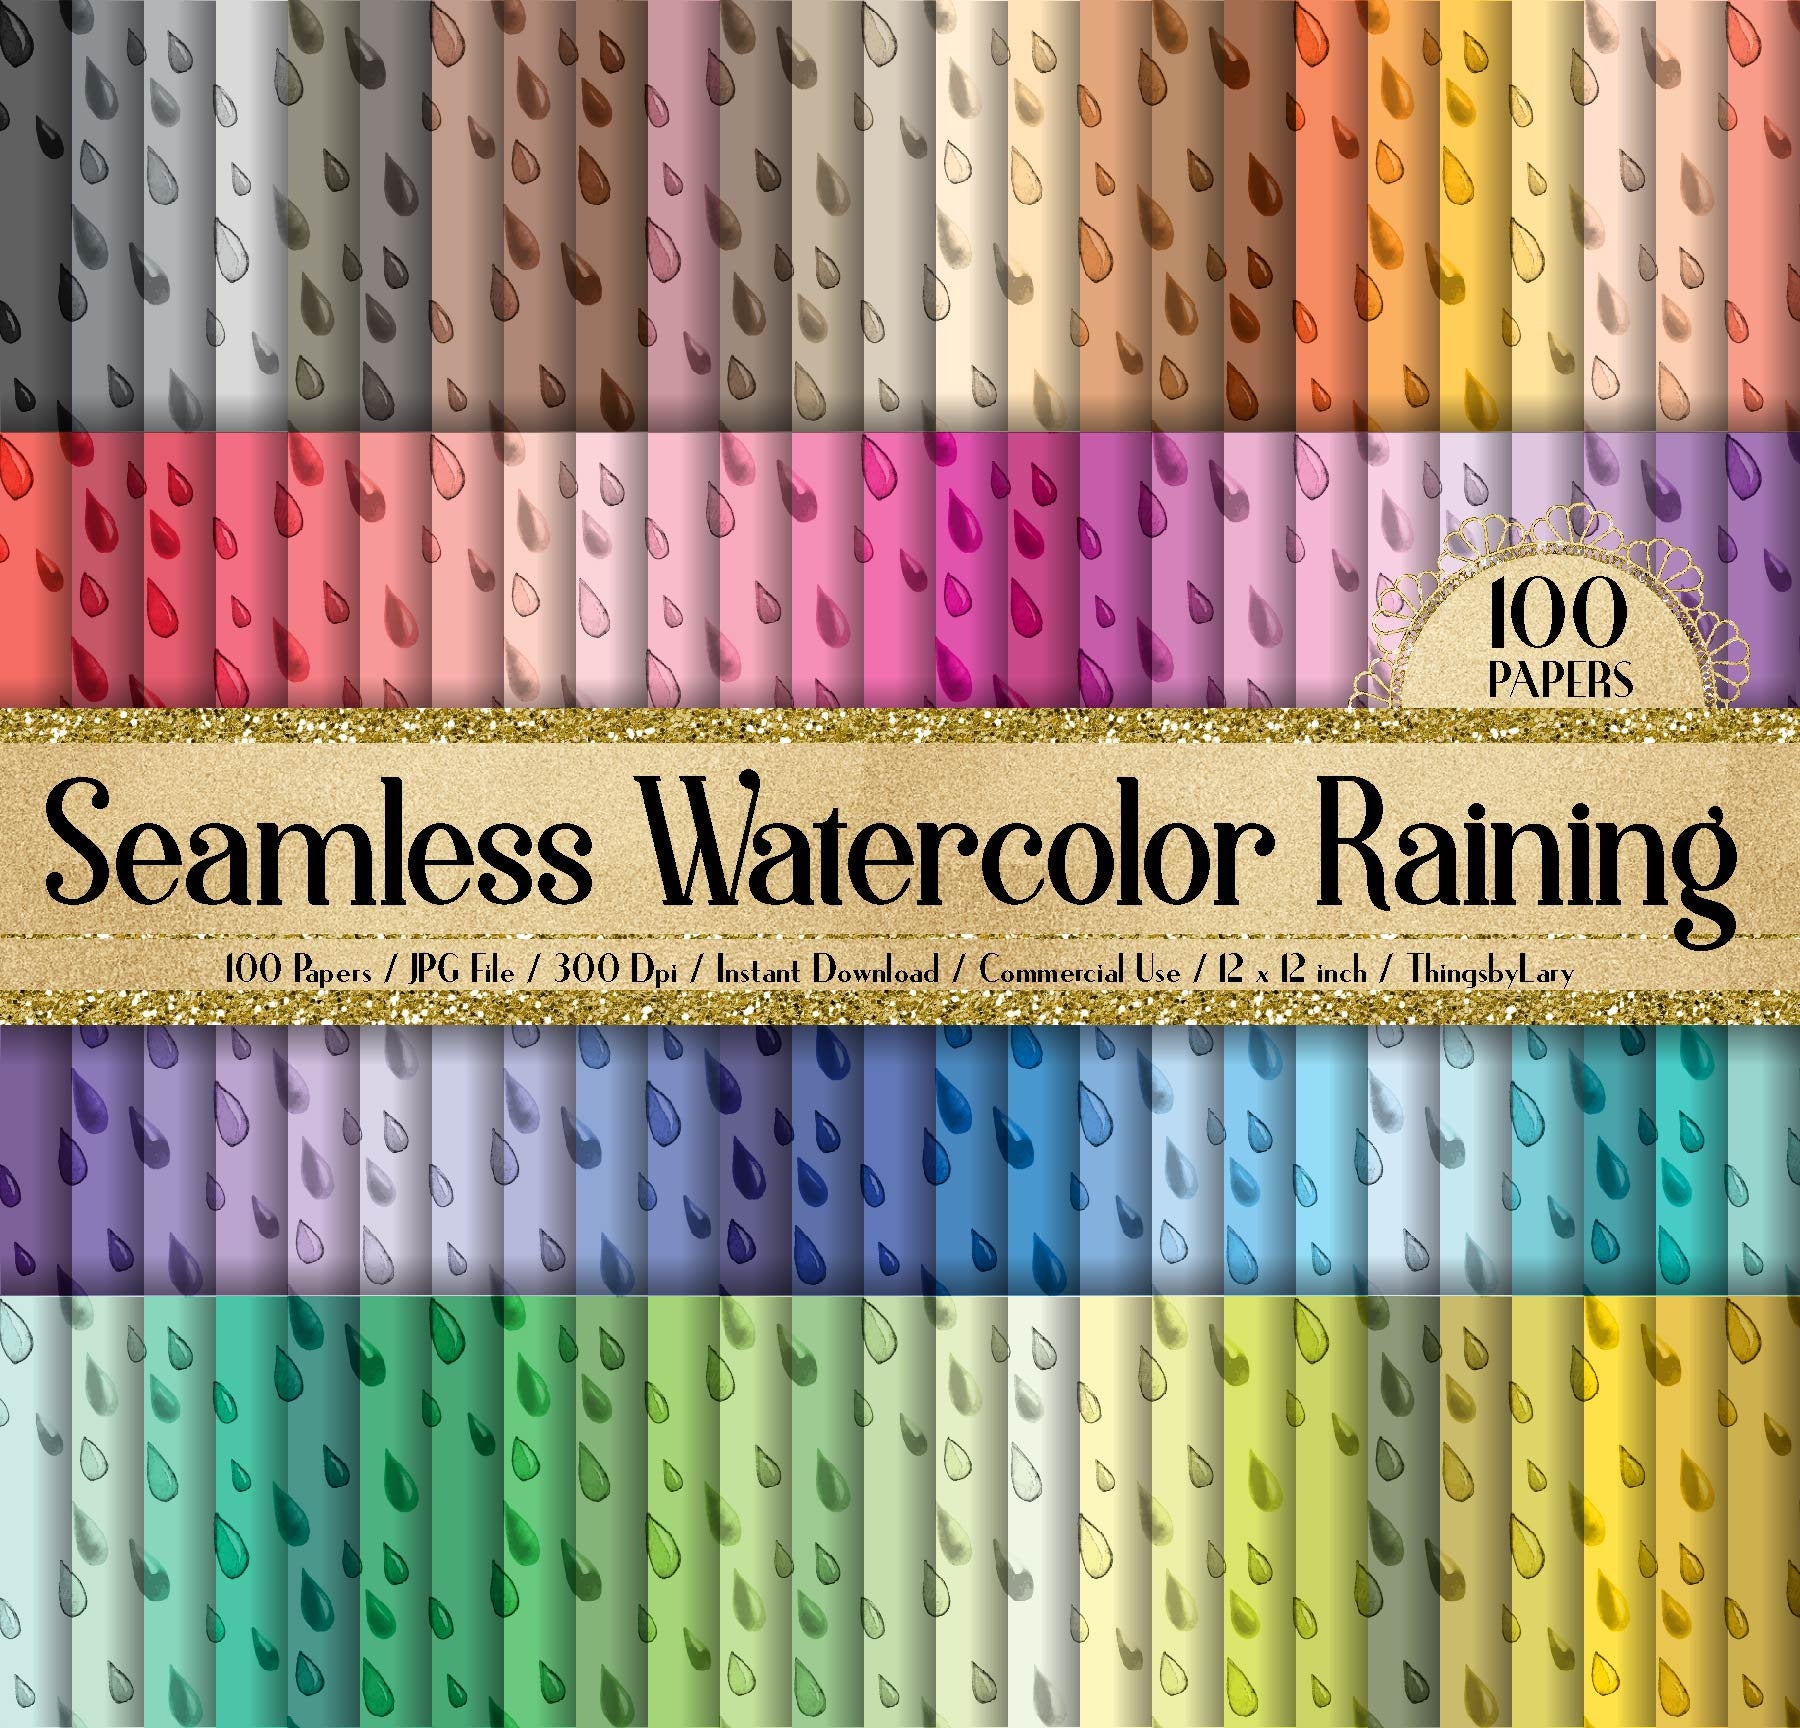 100 Seamless Watercolor Raining Papers 12 inch 300 Dpi Commercial Use Instant Download,Seamless Watercolor Papers,Seamless Raining Papers